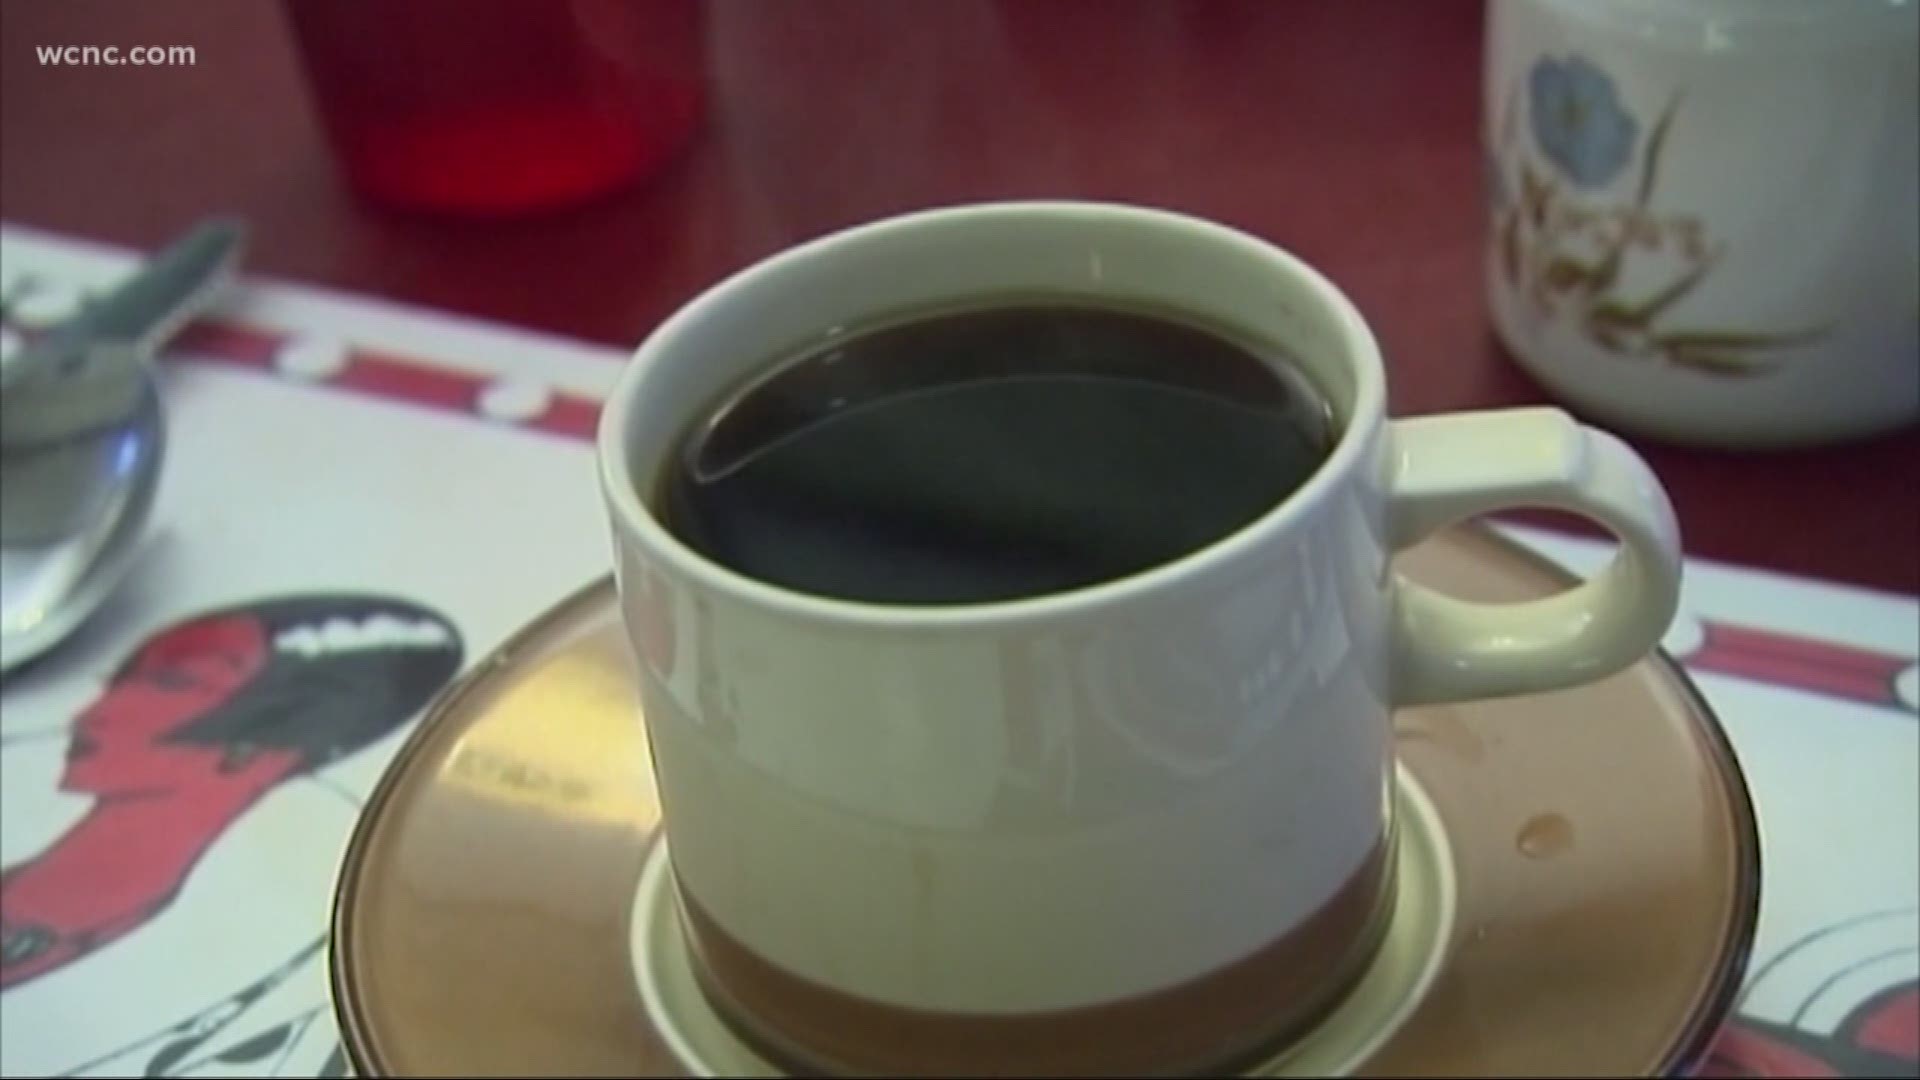 Feeling a little groggy on Monday morning? No worries. According to a new study, experts say most people can have up to six cups of coffee without seeing any side effects of too much caffeine.